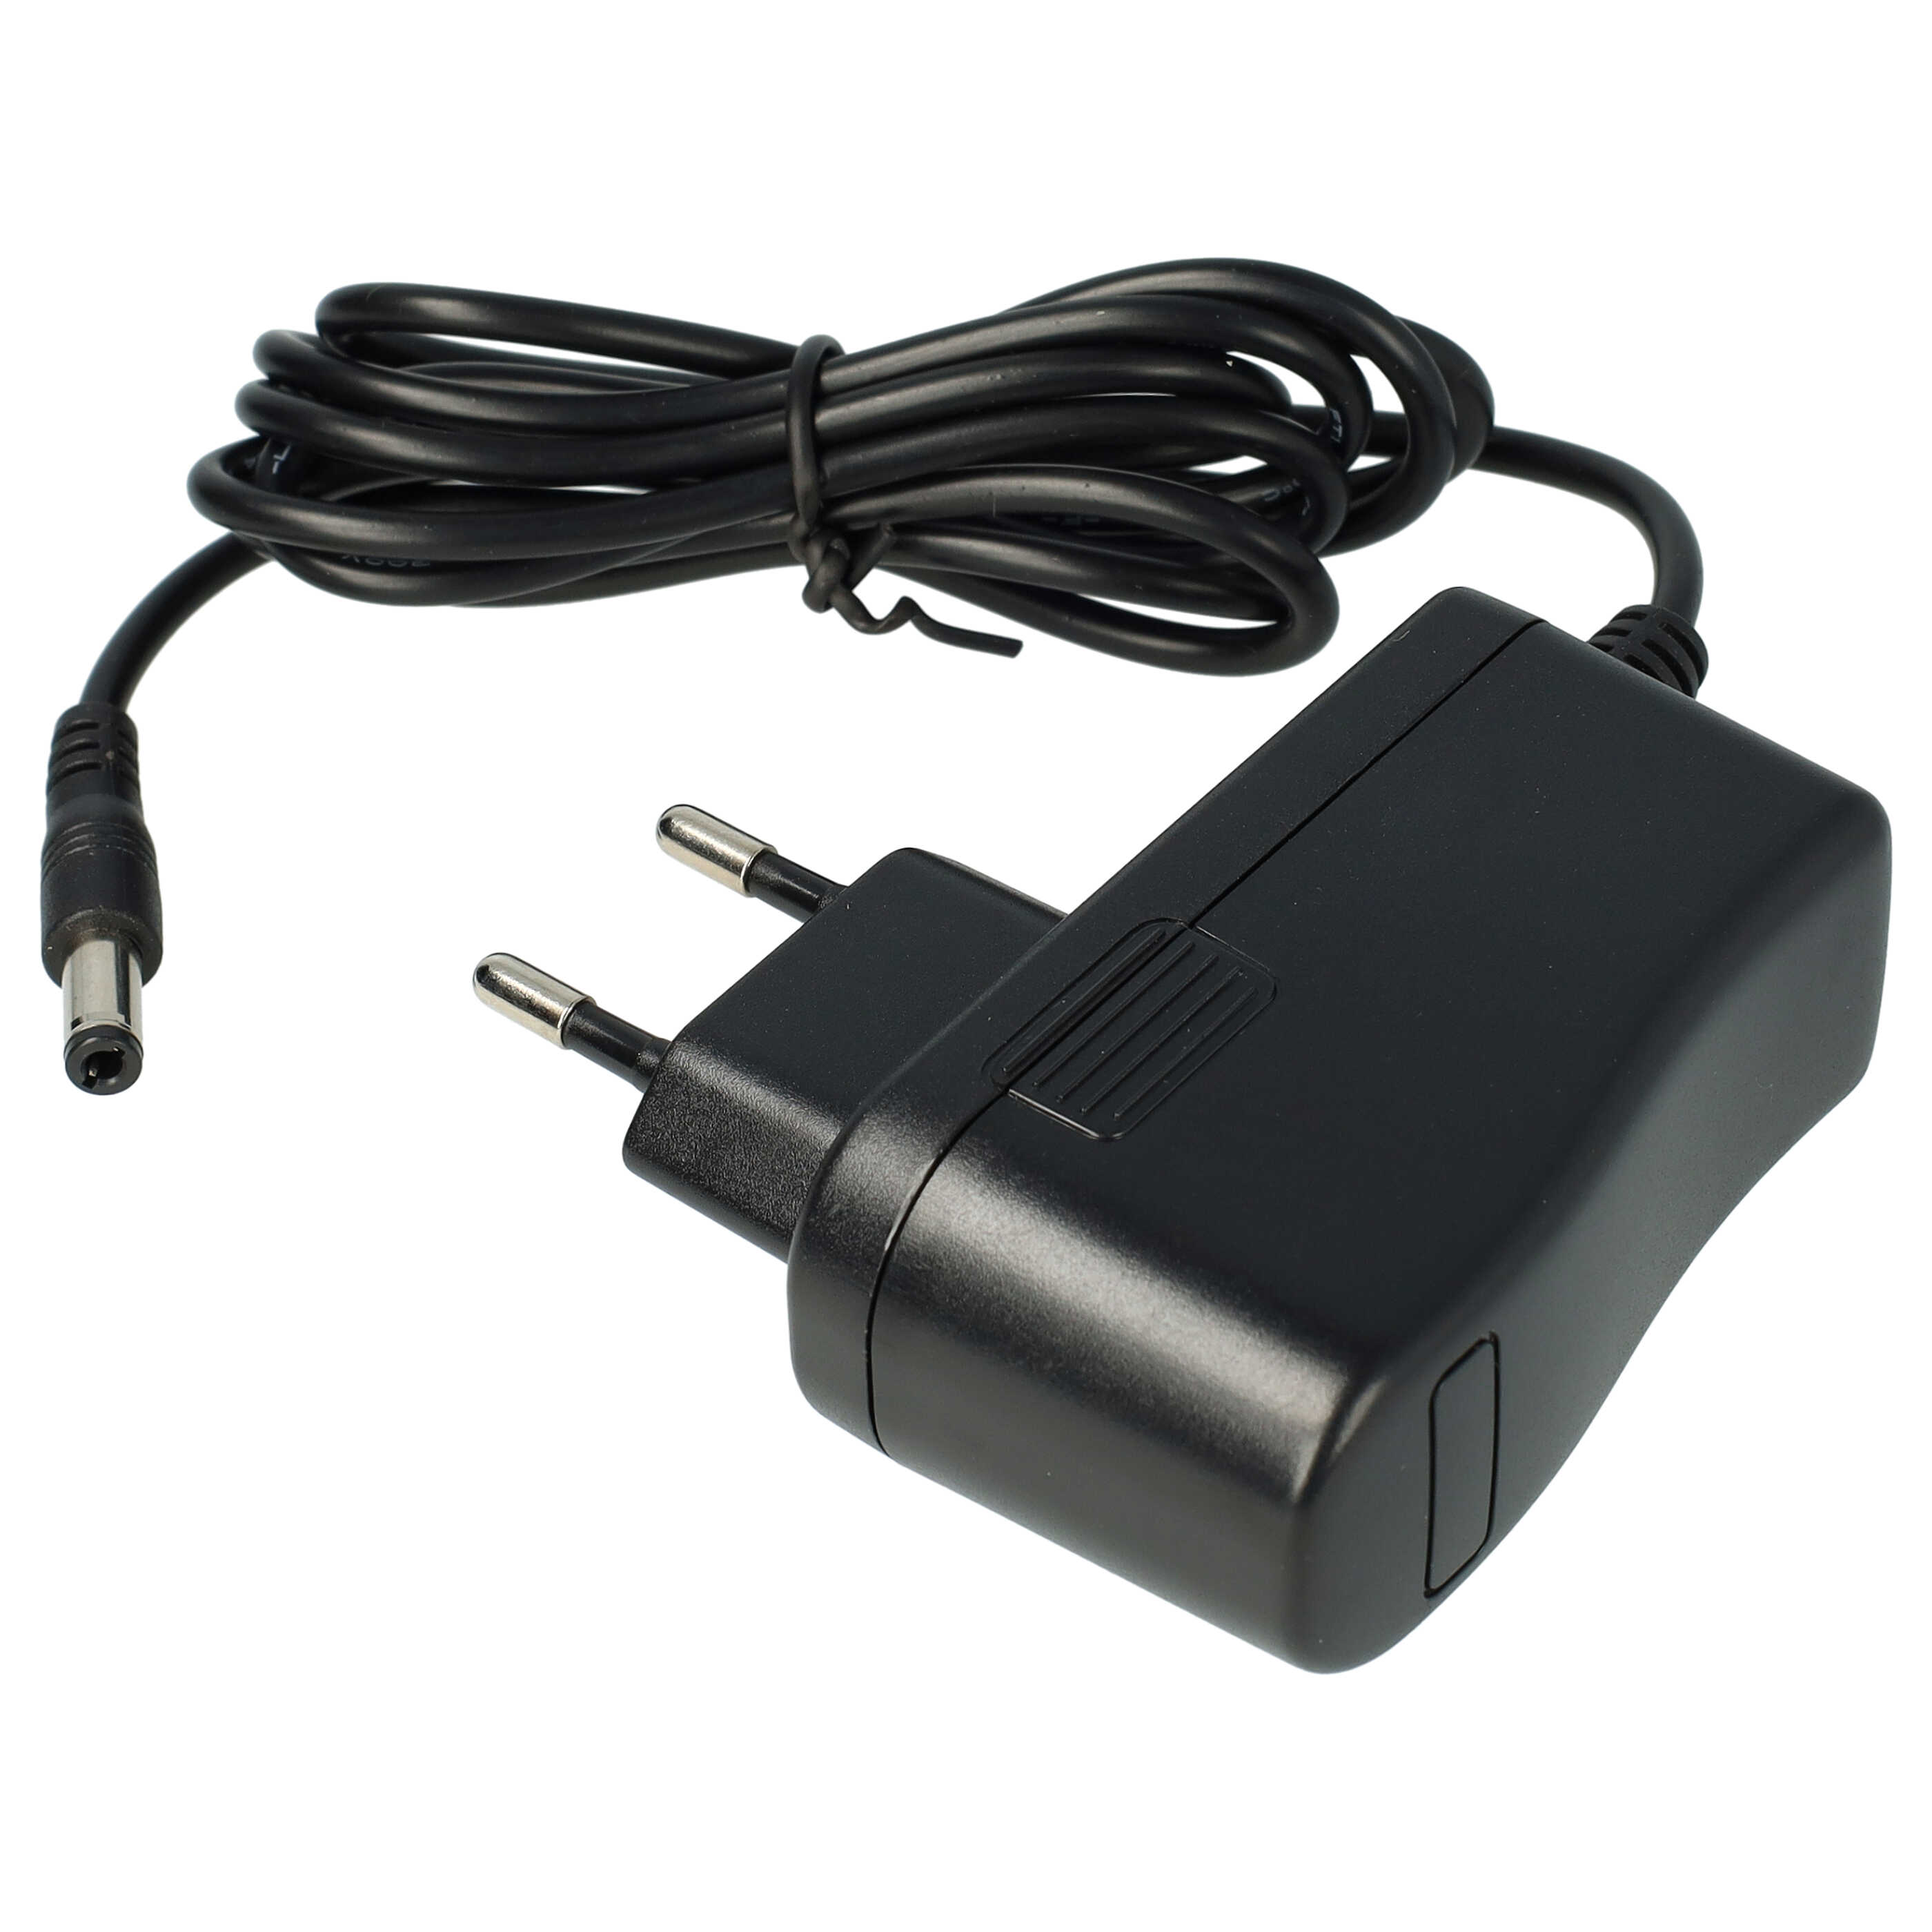 Mains Power Adapter with 5.5 x 2.5 mm Plug suitable for various Electric Devices - 3 V, 2 A